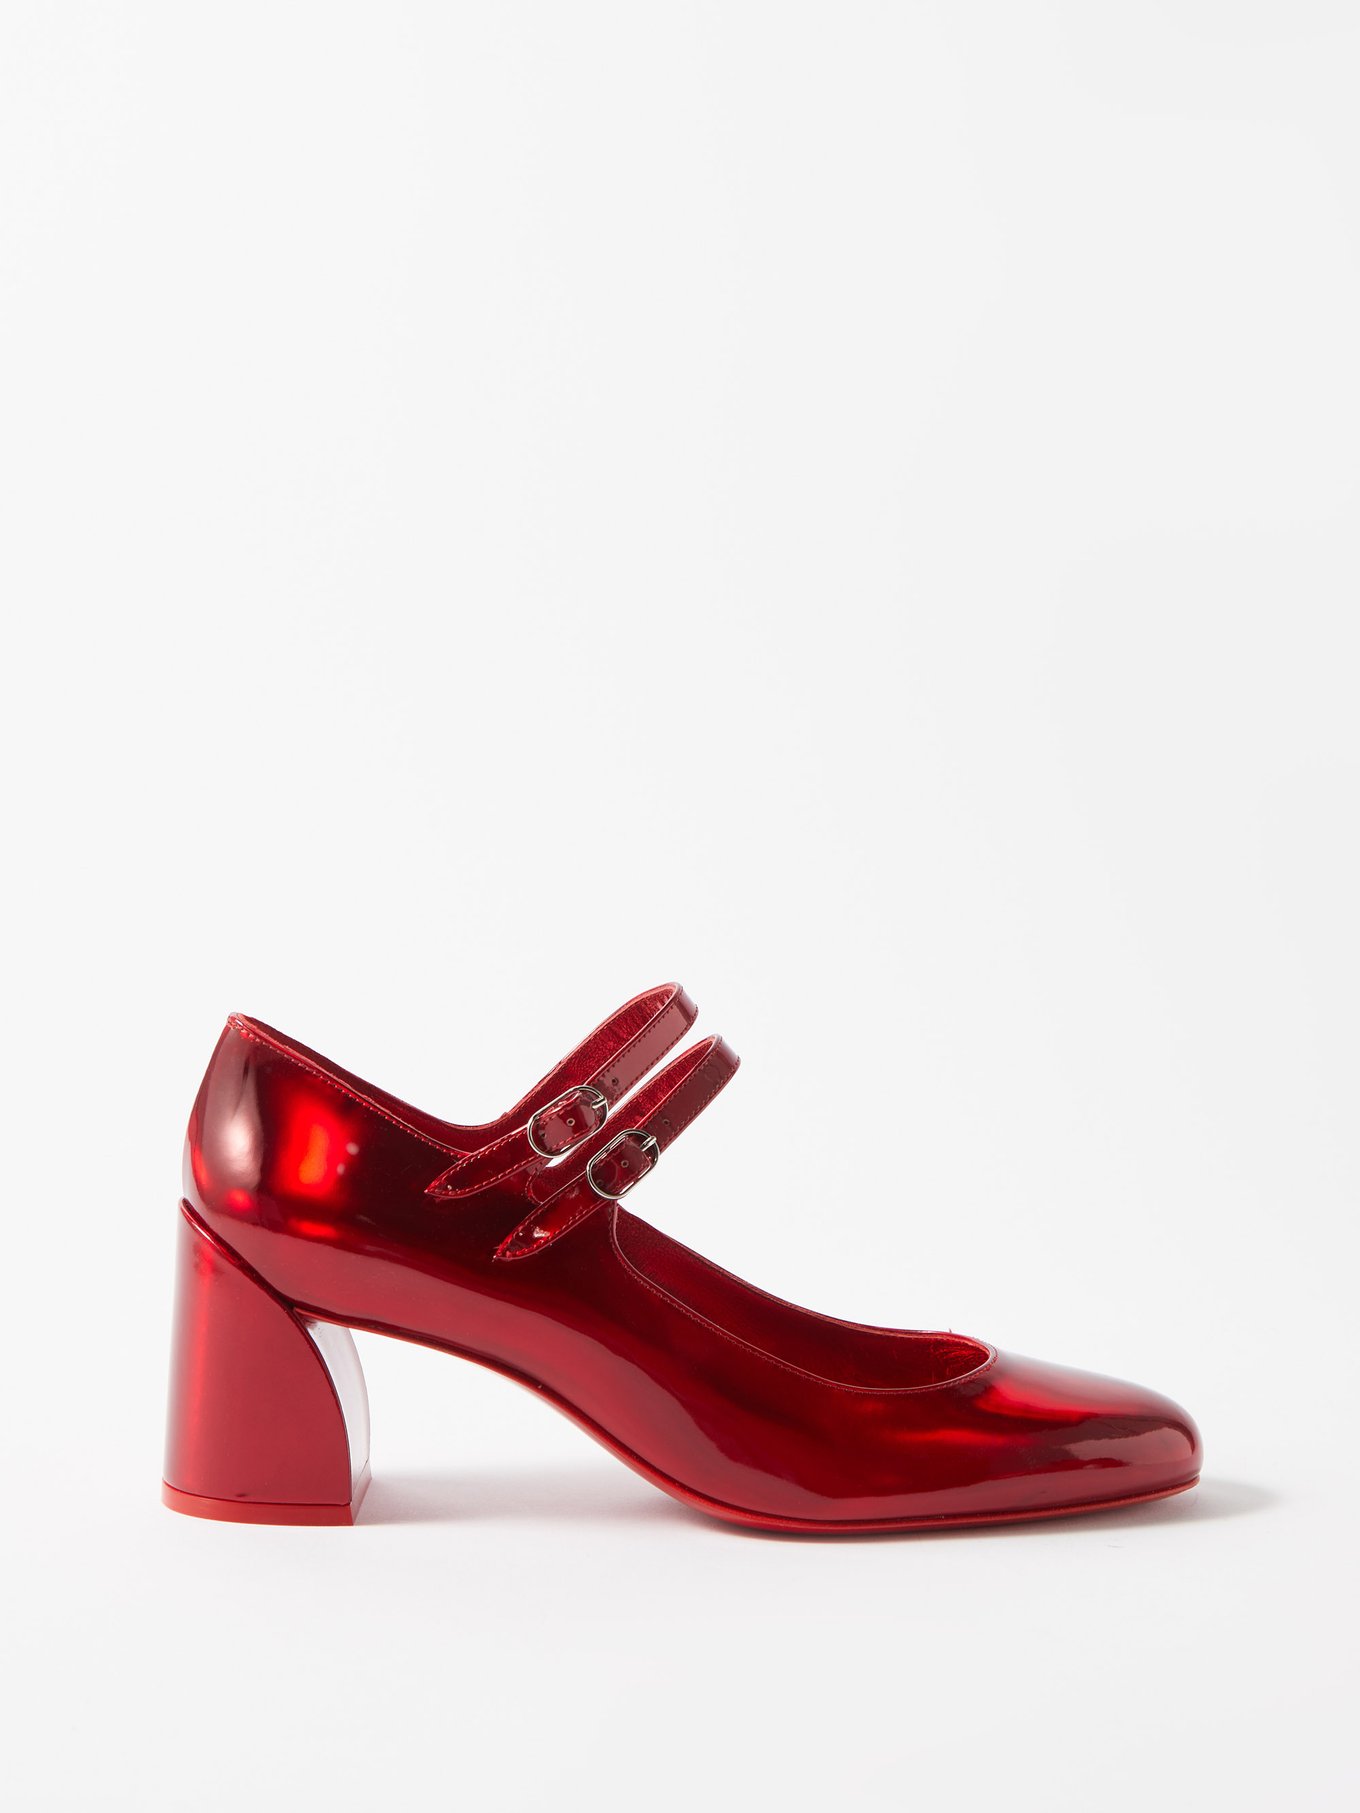 Red Miss Jane 55 leather pumps | Christian Louboutin | MATCHESFASHION US